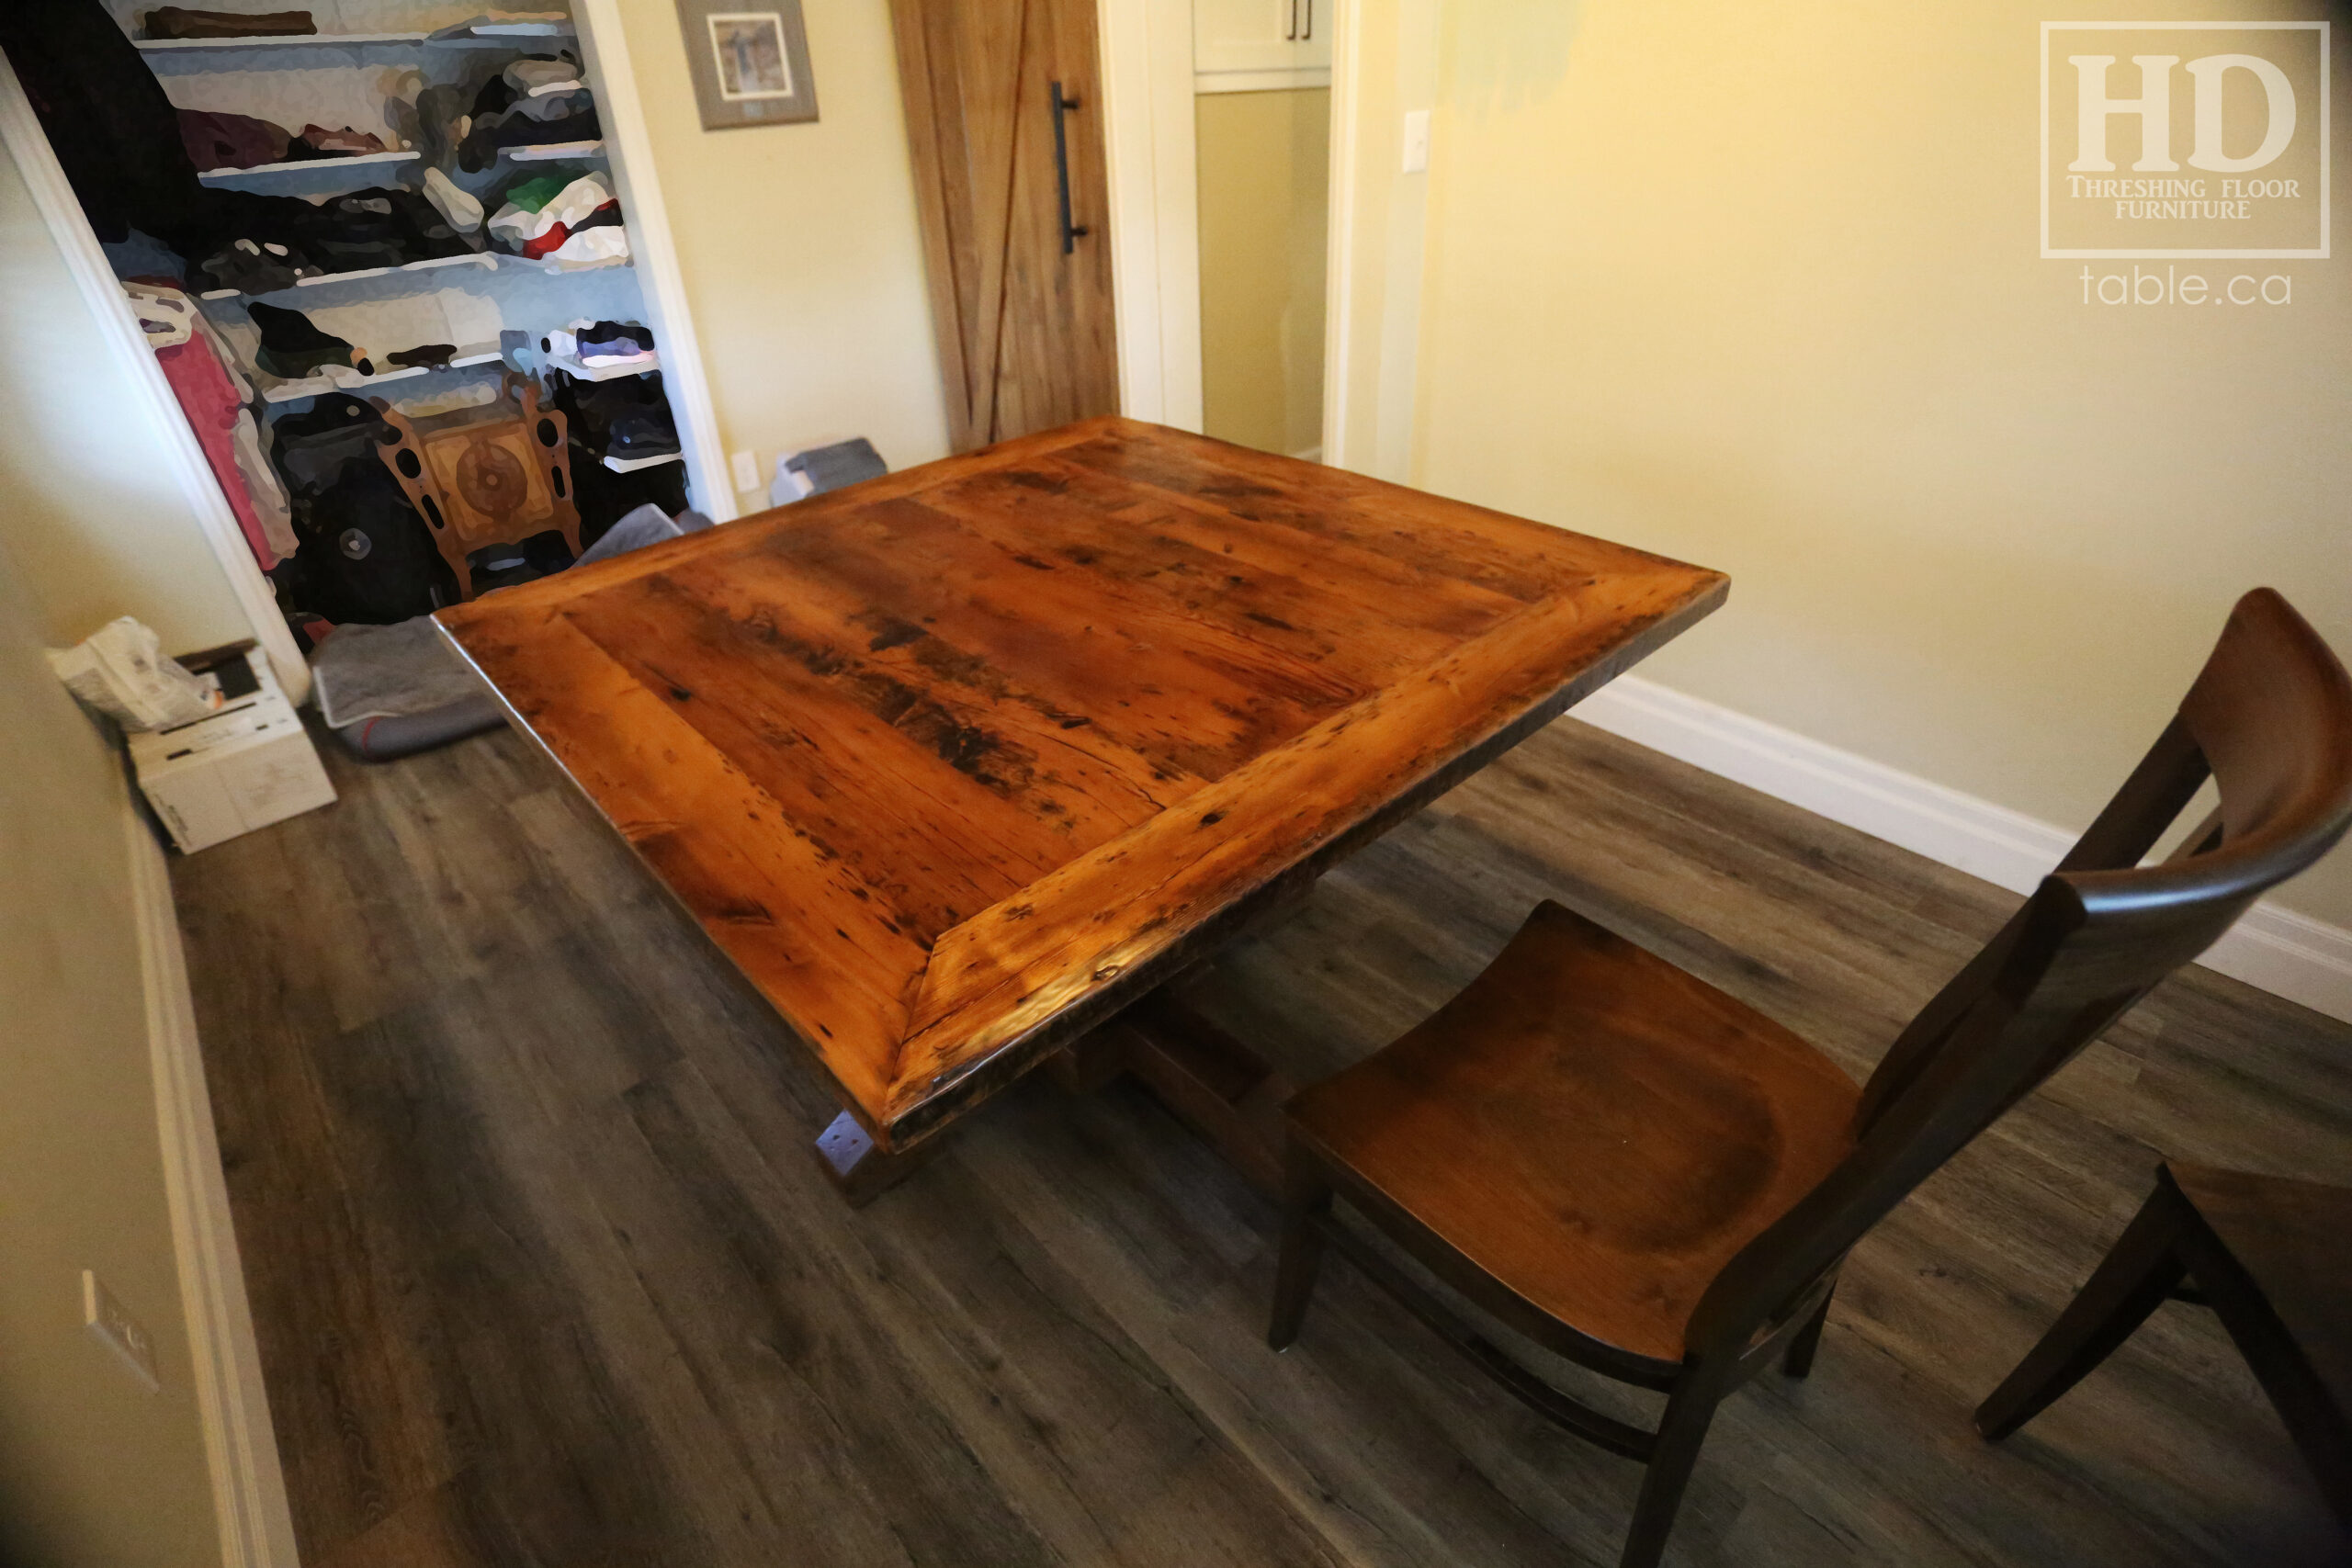 48" x 48" Ontario Barnwood Pedestal Table we made for a Windsor, Ontario home - Hand Hewn Post Base - Old Growth Hemlock Threshing Floor Top - Original edges & distressing maintained - Mitred Corners - Premium epoxy + satin polyurethane finish - [4] Athena Chairs / Wormy Maple - www.table.ca